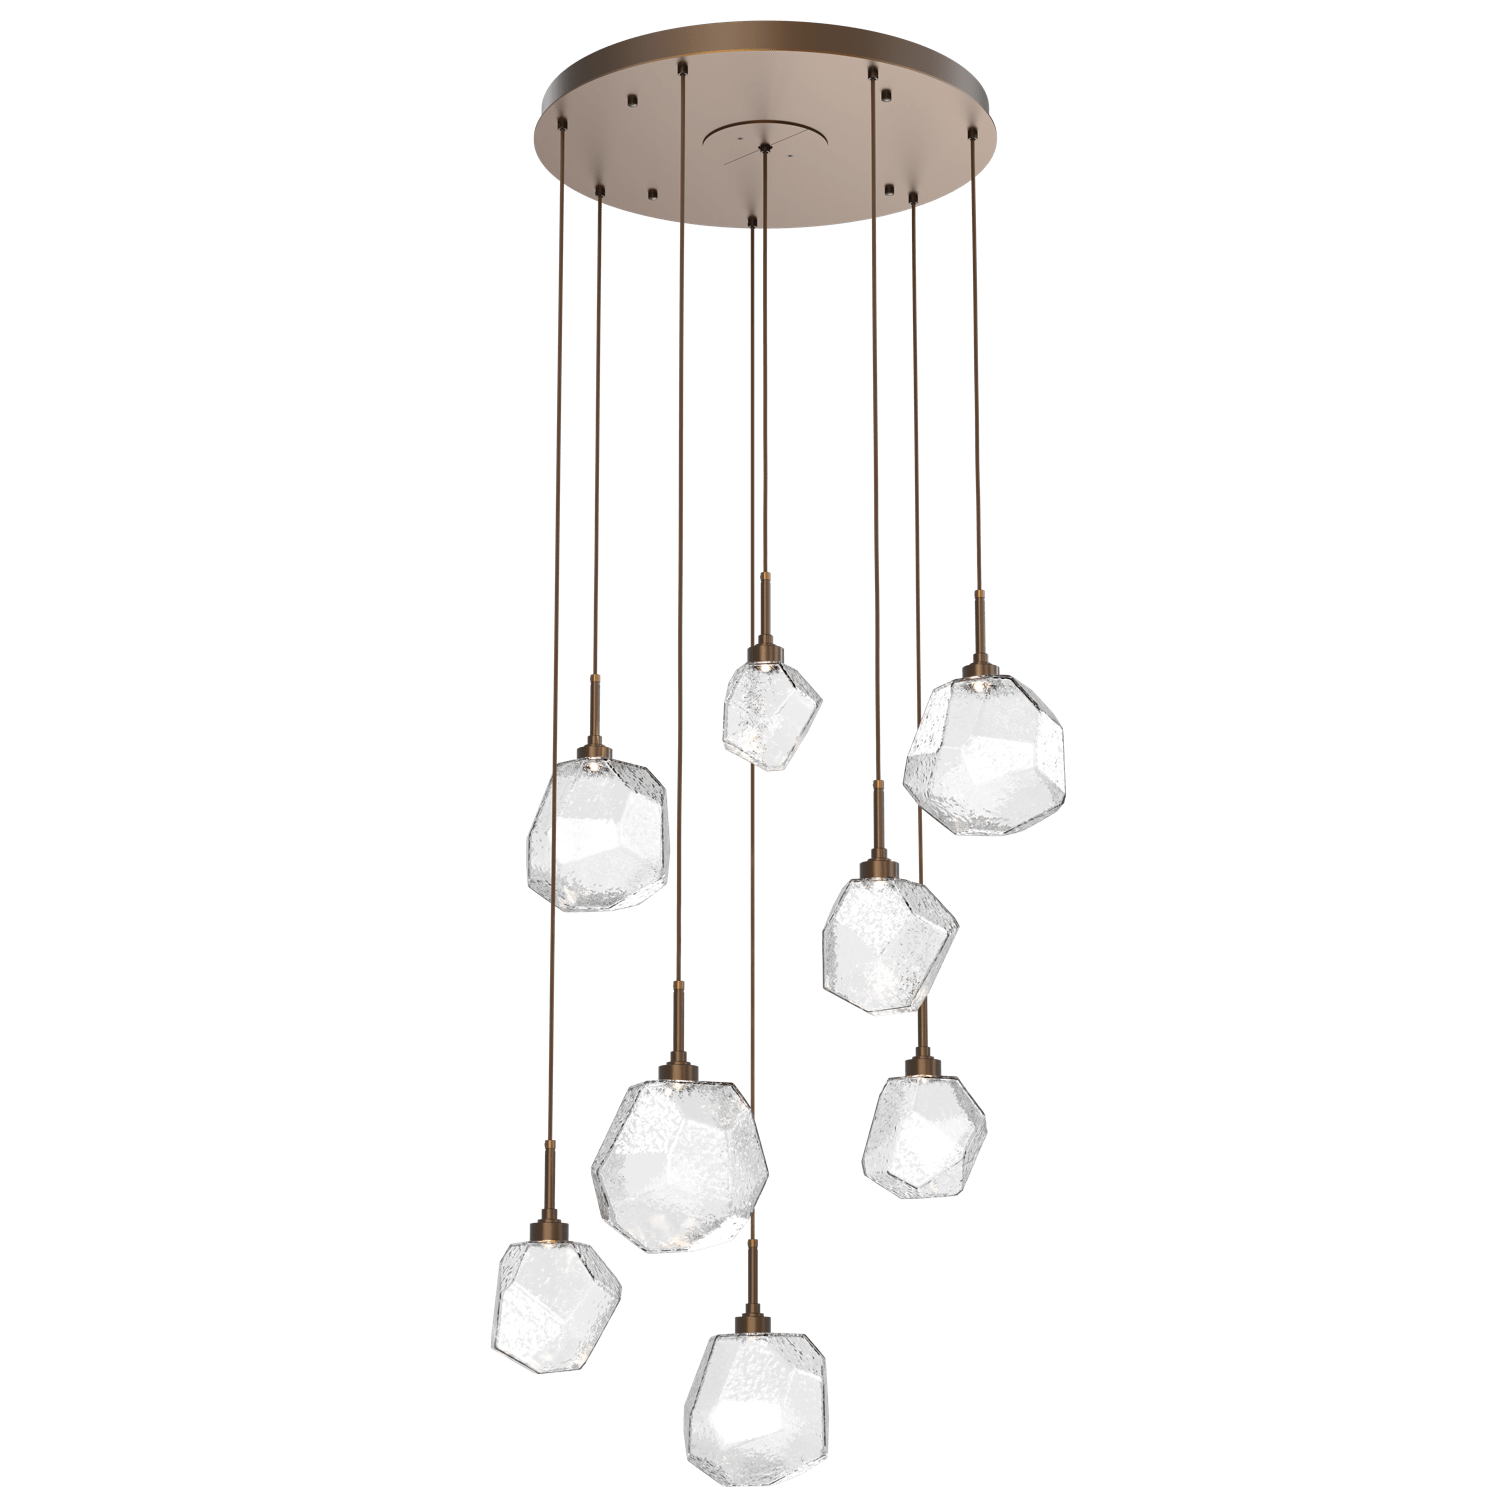 CHB0039-08-FB-C-Hammerton-Studio-Gem-8-light-round-pendant-chandelier-with-flat-bronze-finish-and-clear-blown-glass-shades-and-LED-lamping